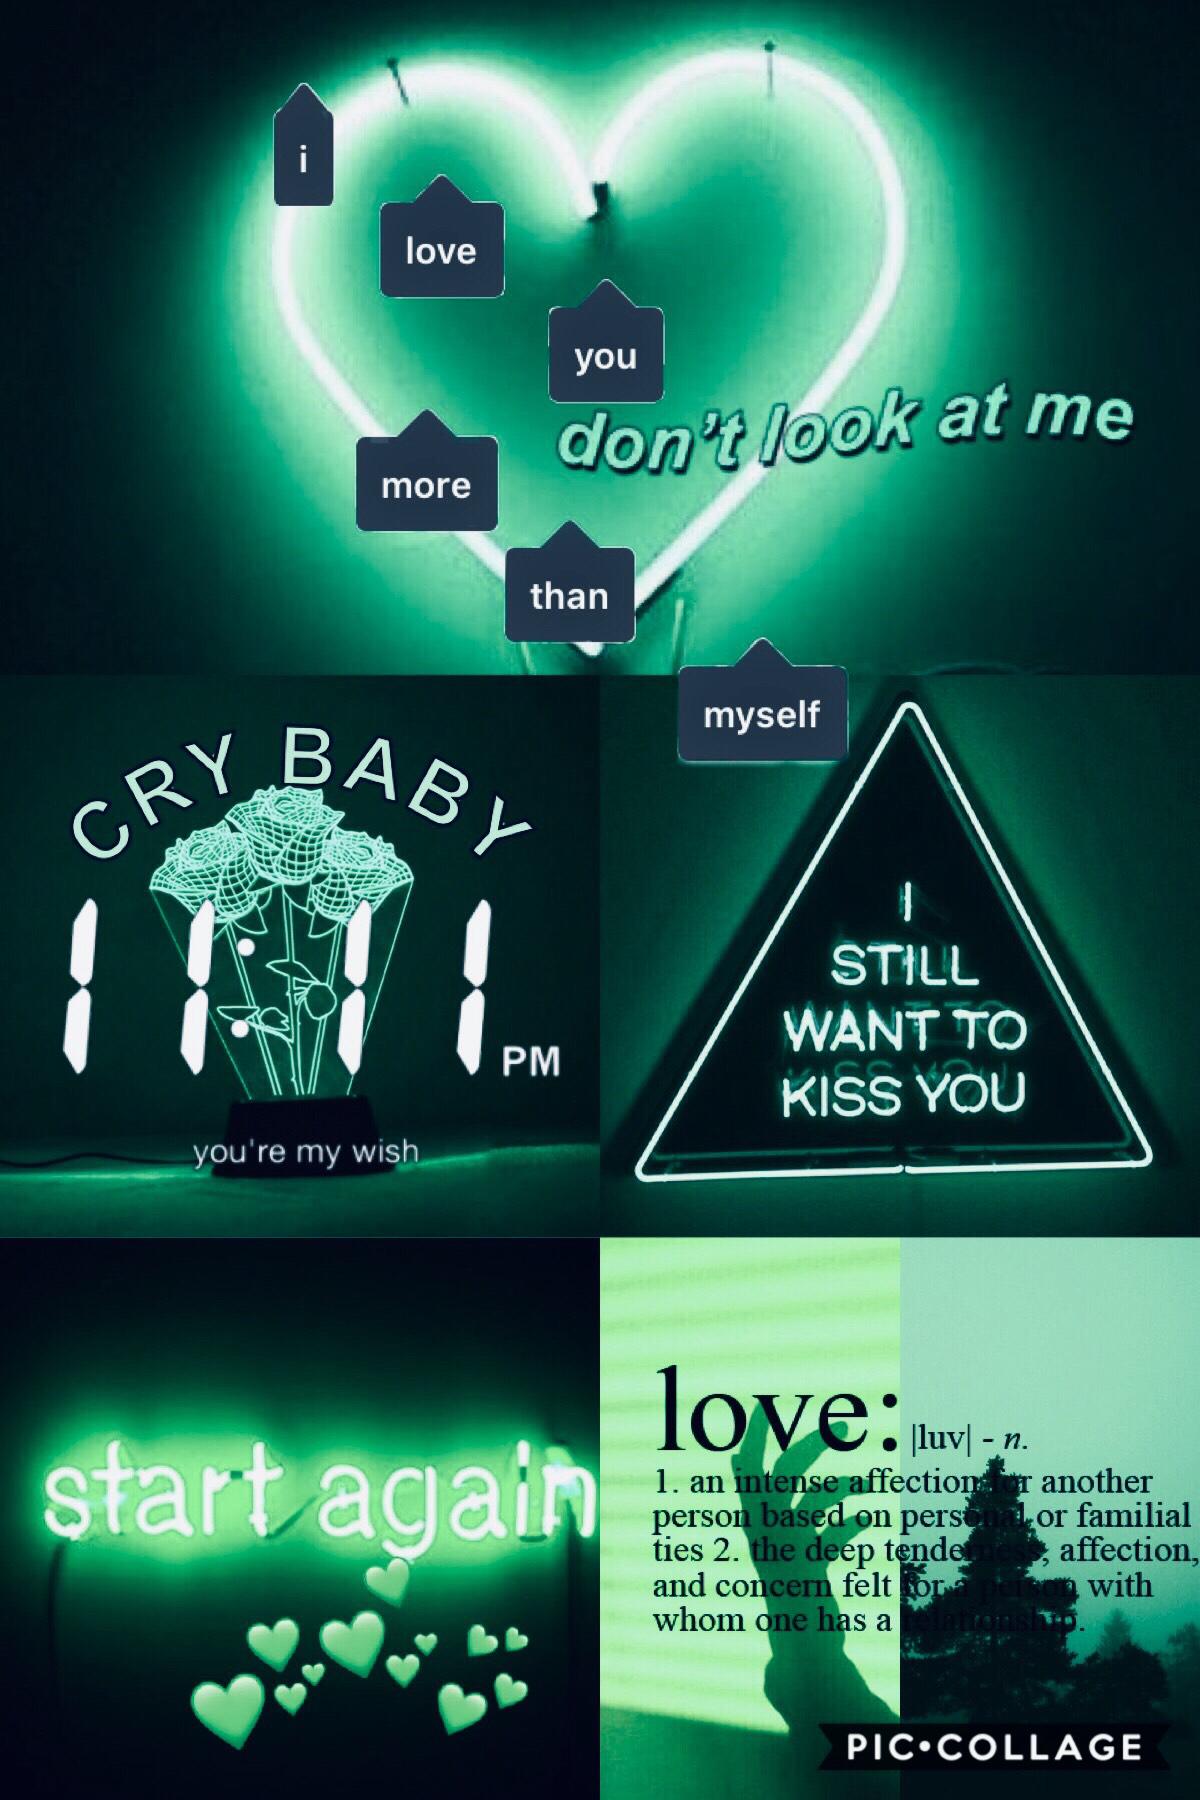 💚 i love you more than i love myself 💚

i love how i’m single and have never been in a relationship, but still making this 